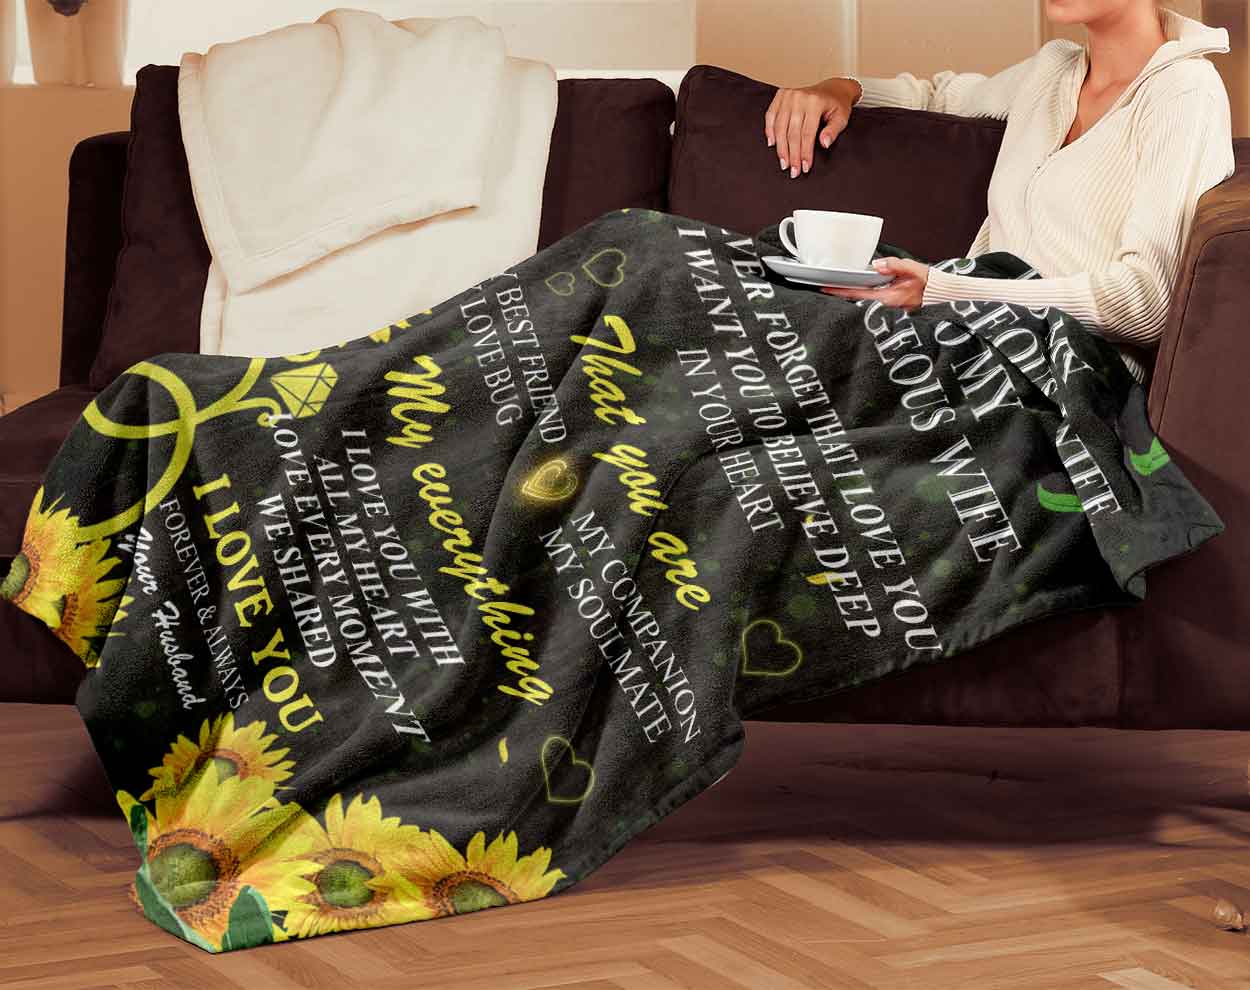 Skitongifts Blanket For Sofa Throws, Bed Throws blanket - Husband To My Gorgeous Wife, Sunflower Never Forget That, You Are My Everything Great-TT2501